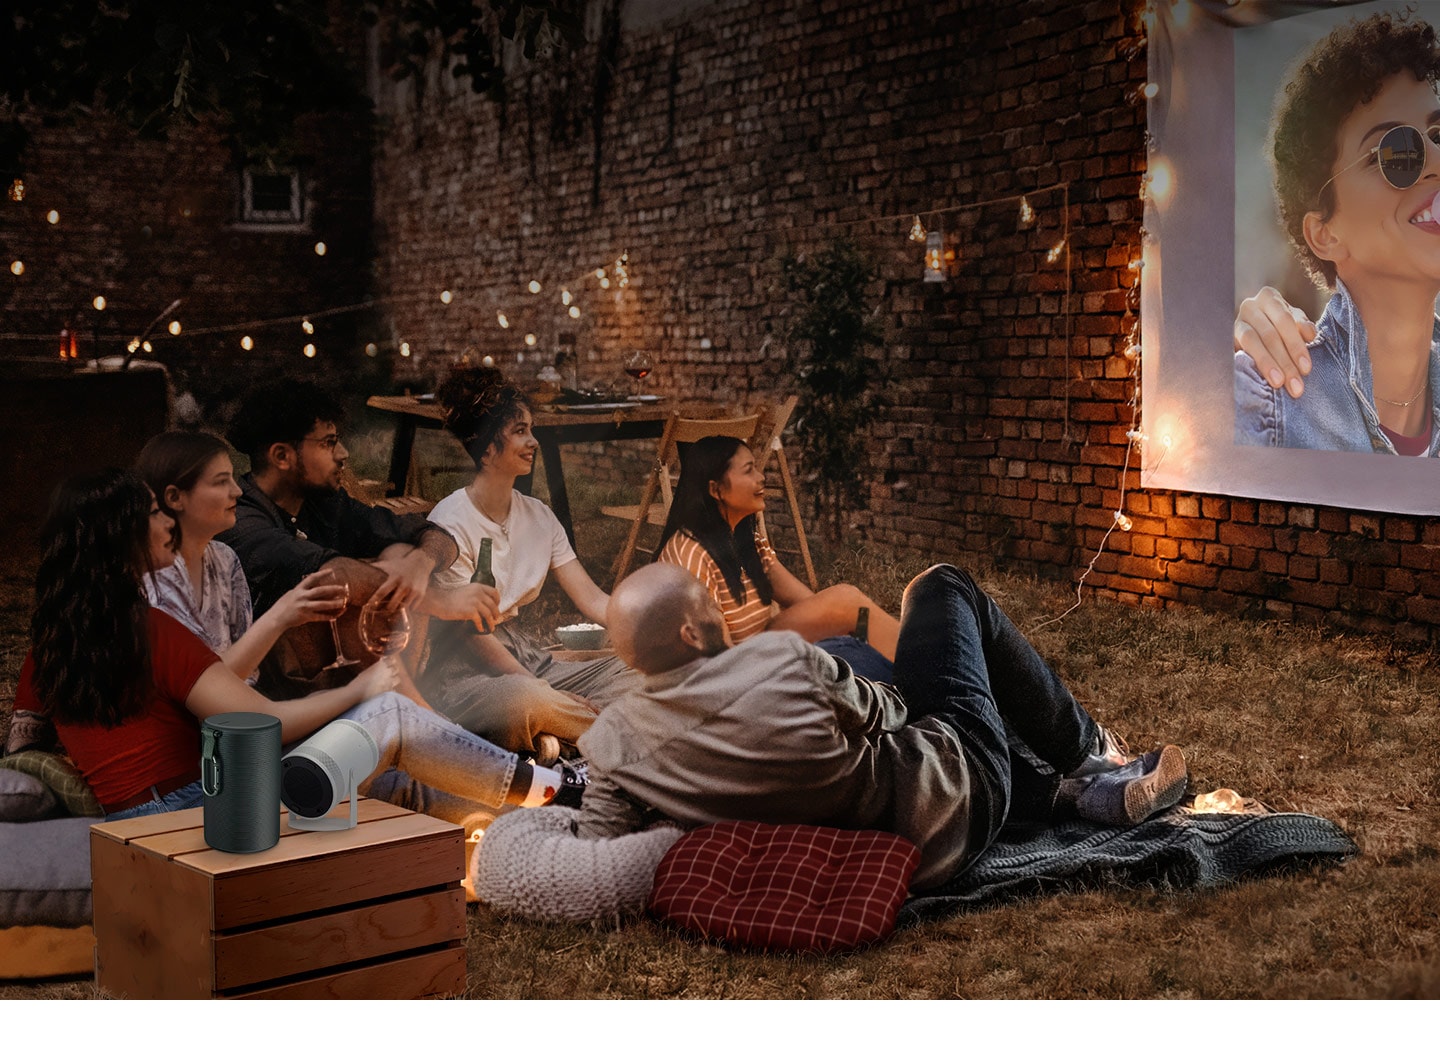 6 people on the ground are watching a projected image from the Freestyle in an outdoor setting. The case is placed next to the Freestyle.